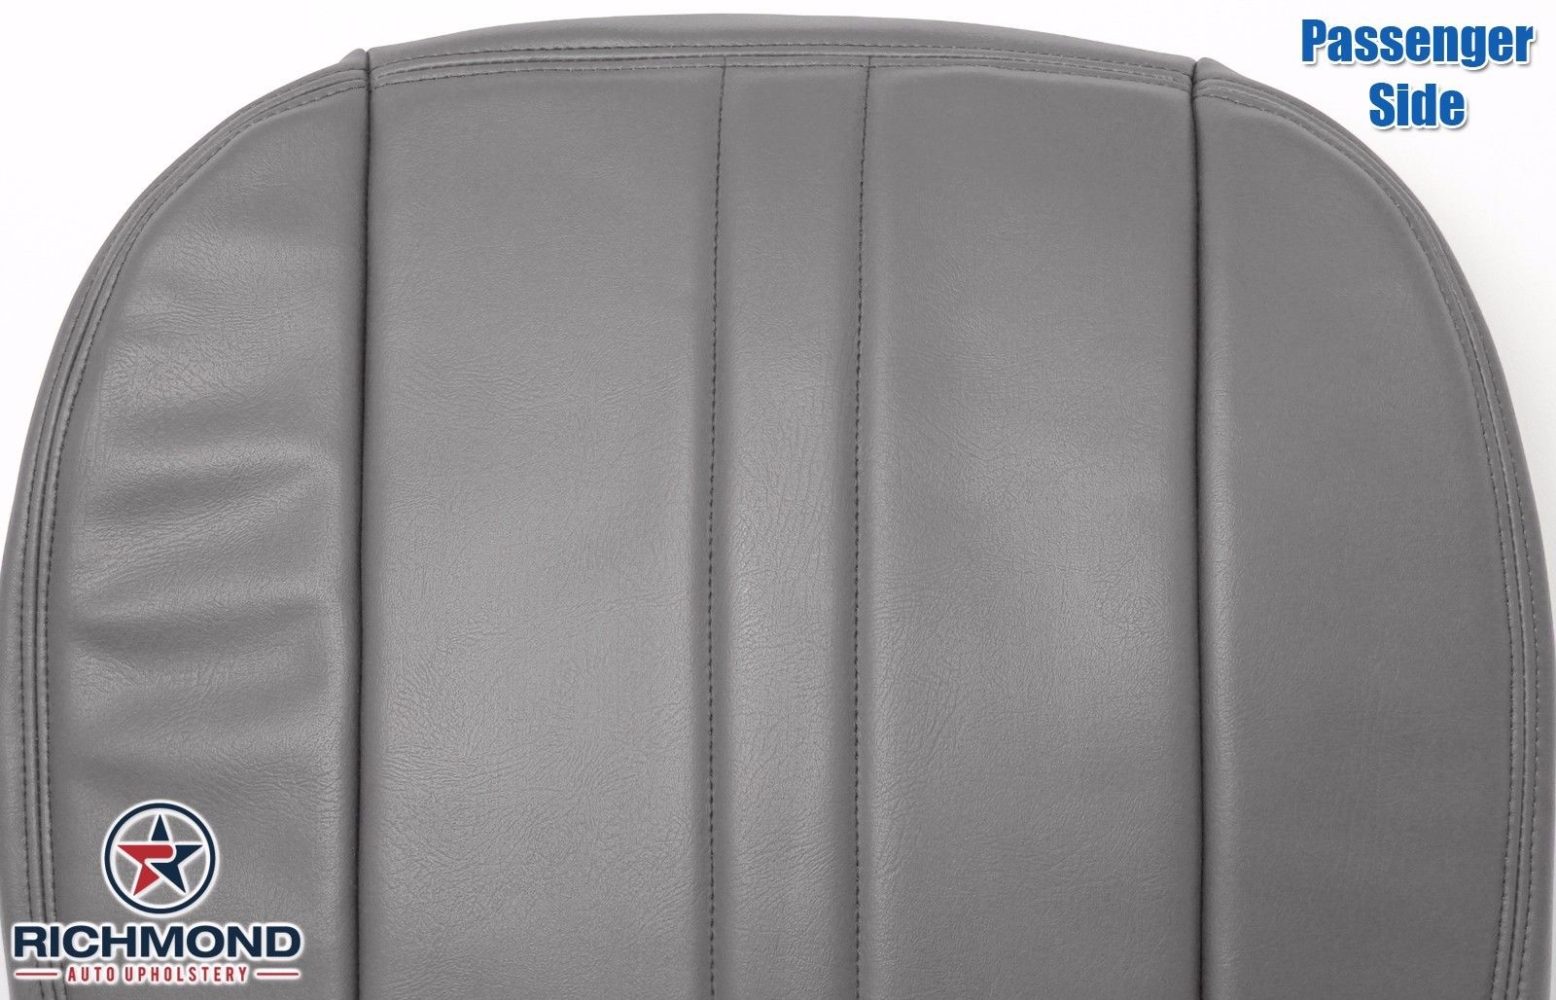 2006 2007 2008 Chevy Express Cargo Van Passenger Bottom Cloth Cover Pewter Gray